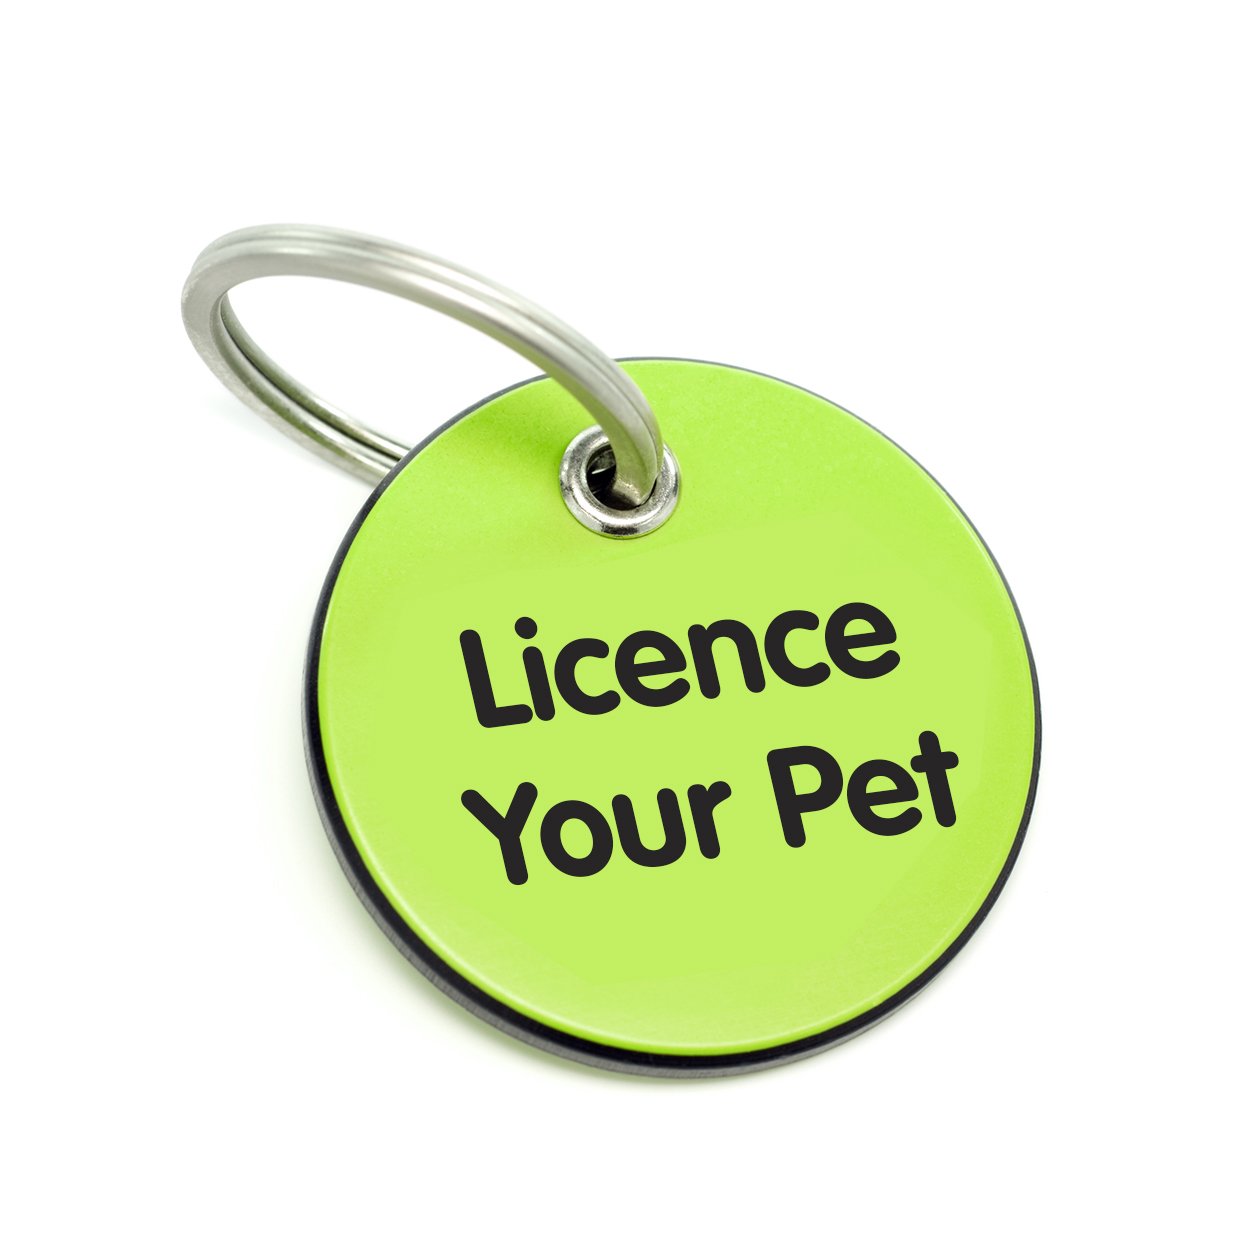 Photo of a Pet Licence tag that reads Licence your Pet